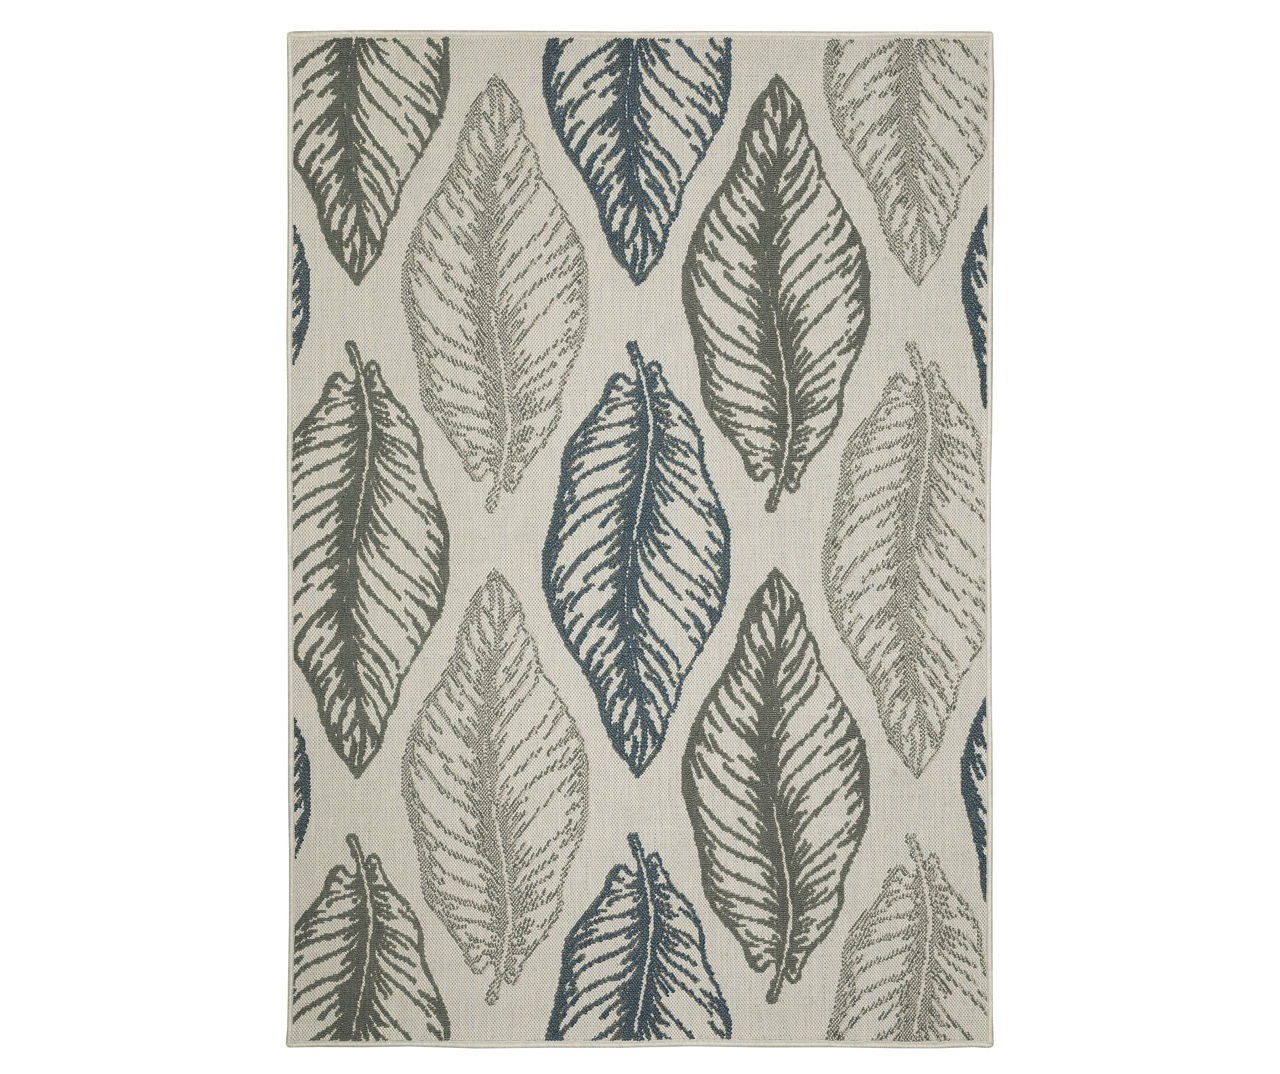 Torian Beige, Green & Blue Leaves Outdoor Area Rug, (3.3' x 5')